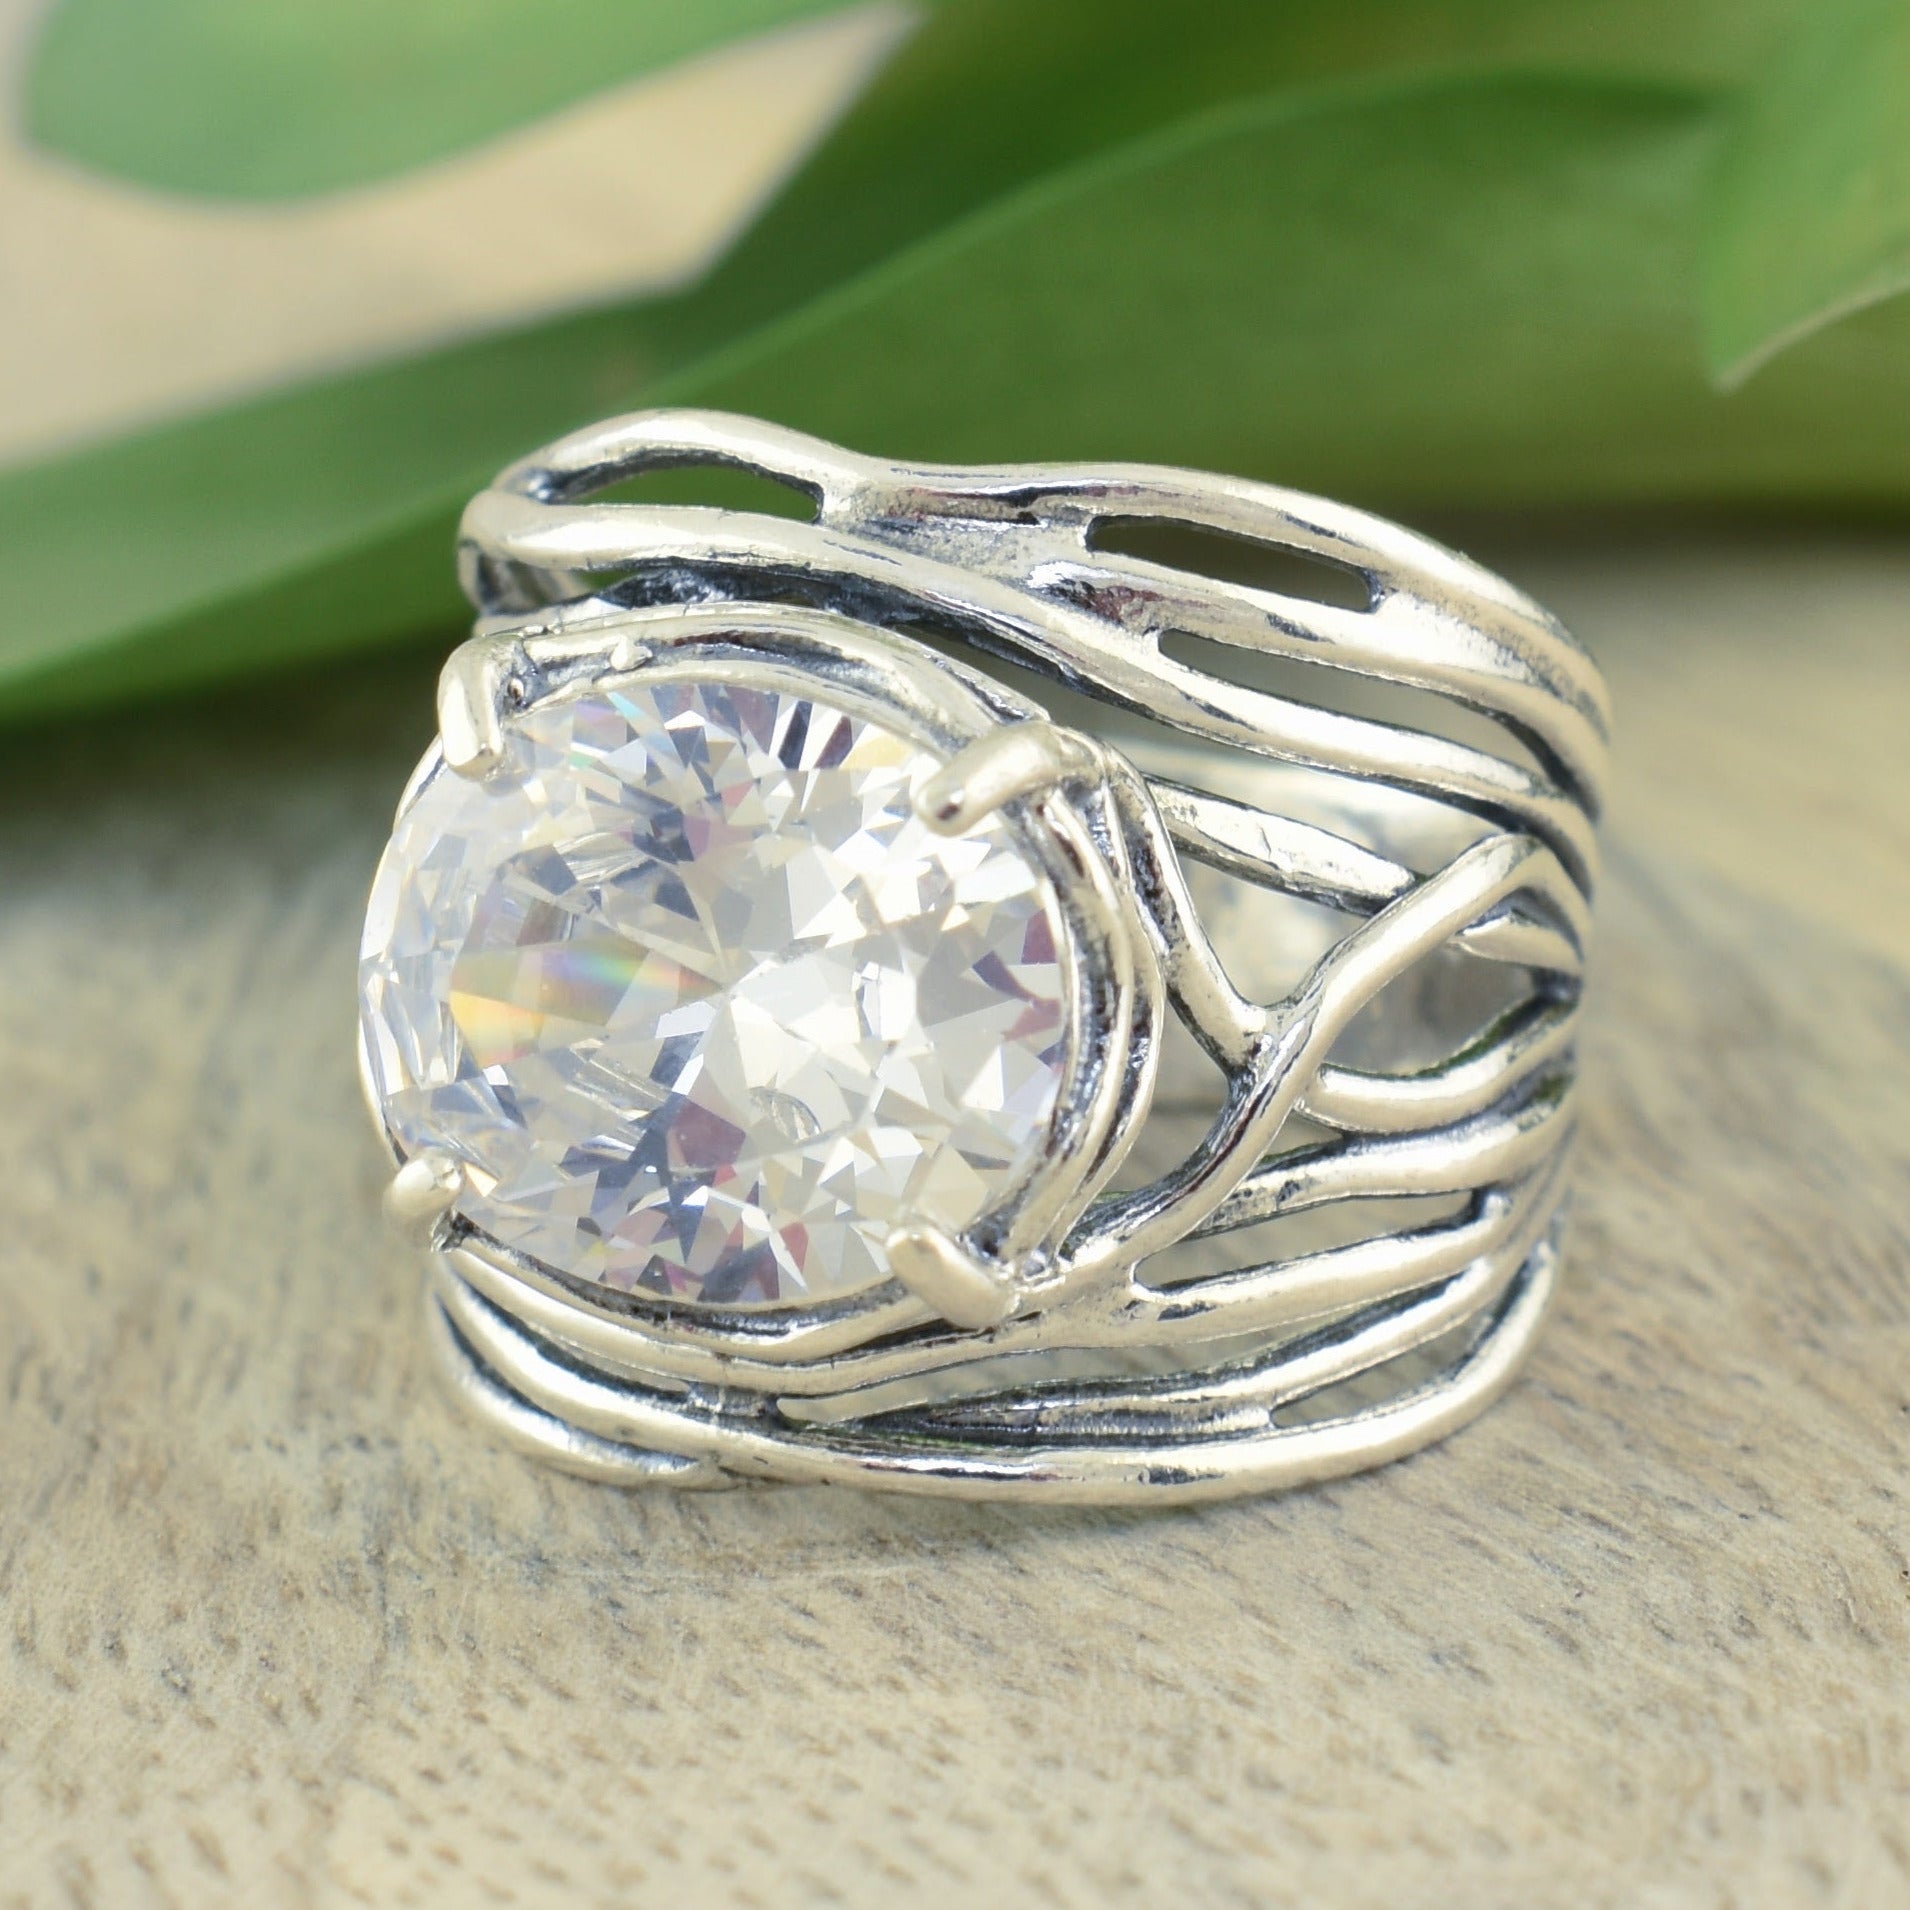 .925 Sterling Silver Wrapped Ring with Large CZ Center.  First Class Ring.